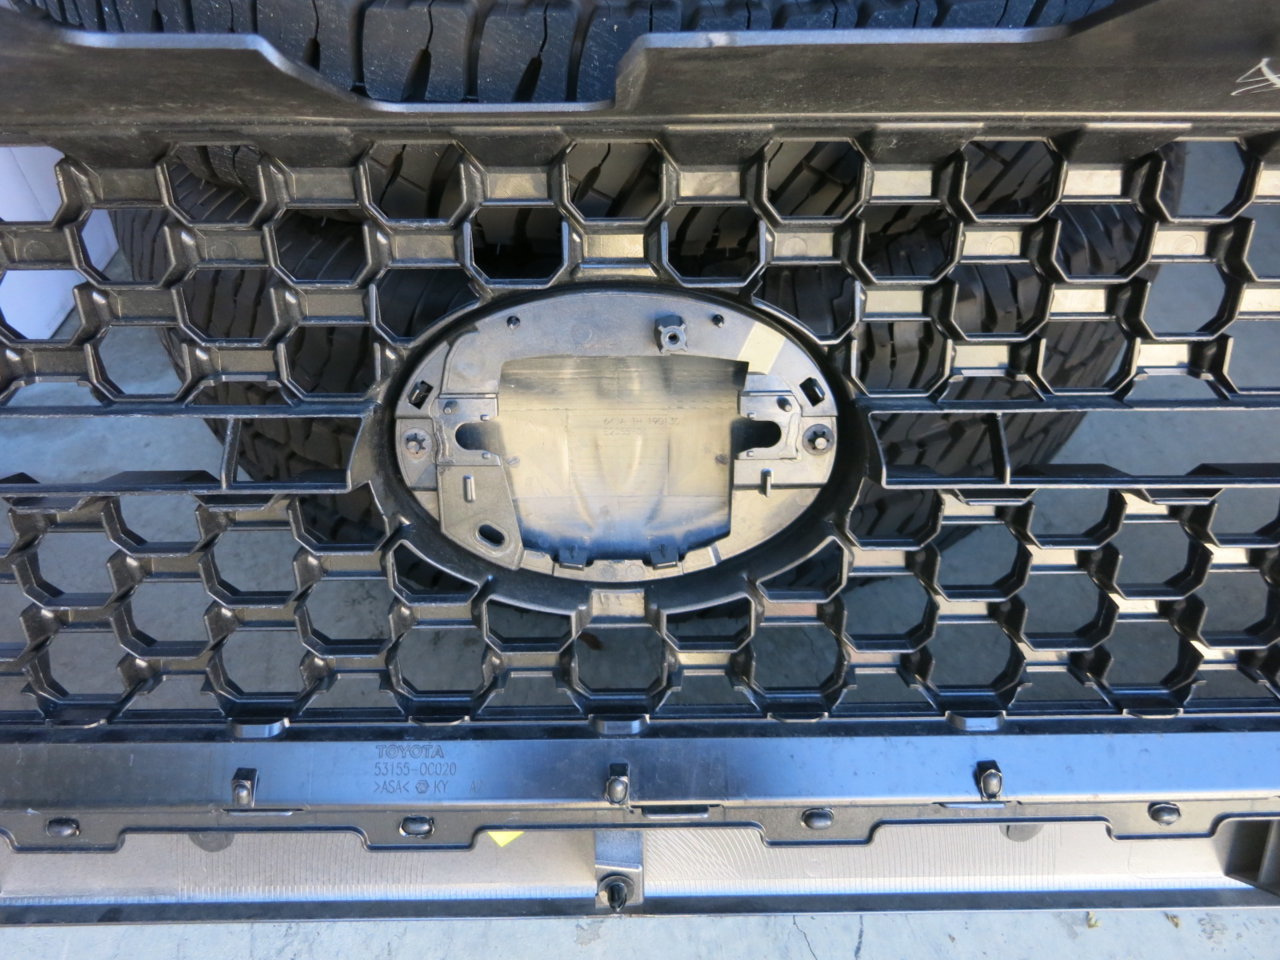 SOLD - 2019 SR5 TRD Sport grille w/TSS sensor cover - MGM | Toyota Tundra Forum 2019 Tundra Trd Pro Grill With Sensor